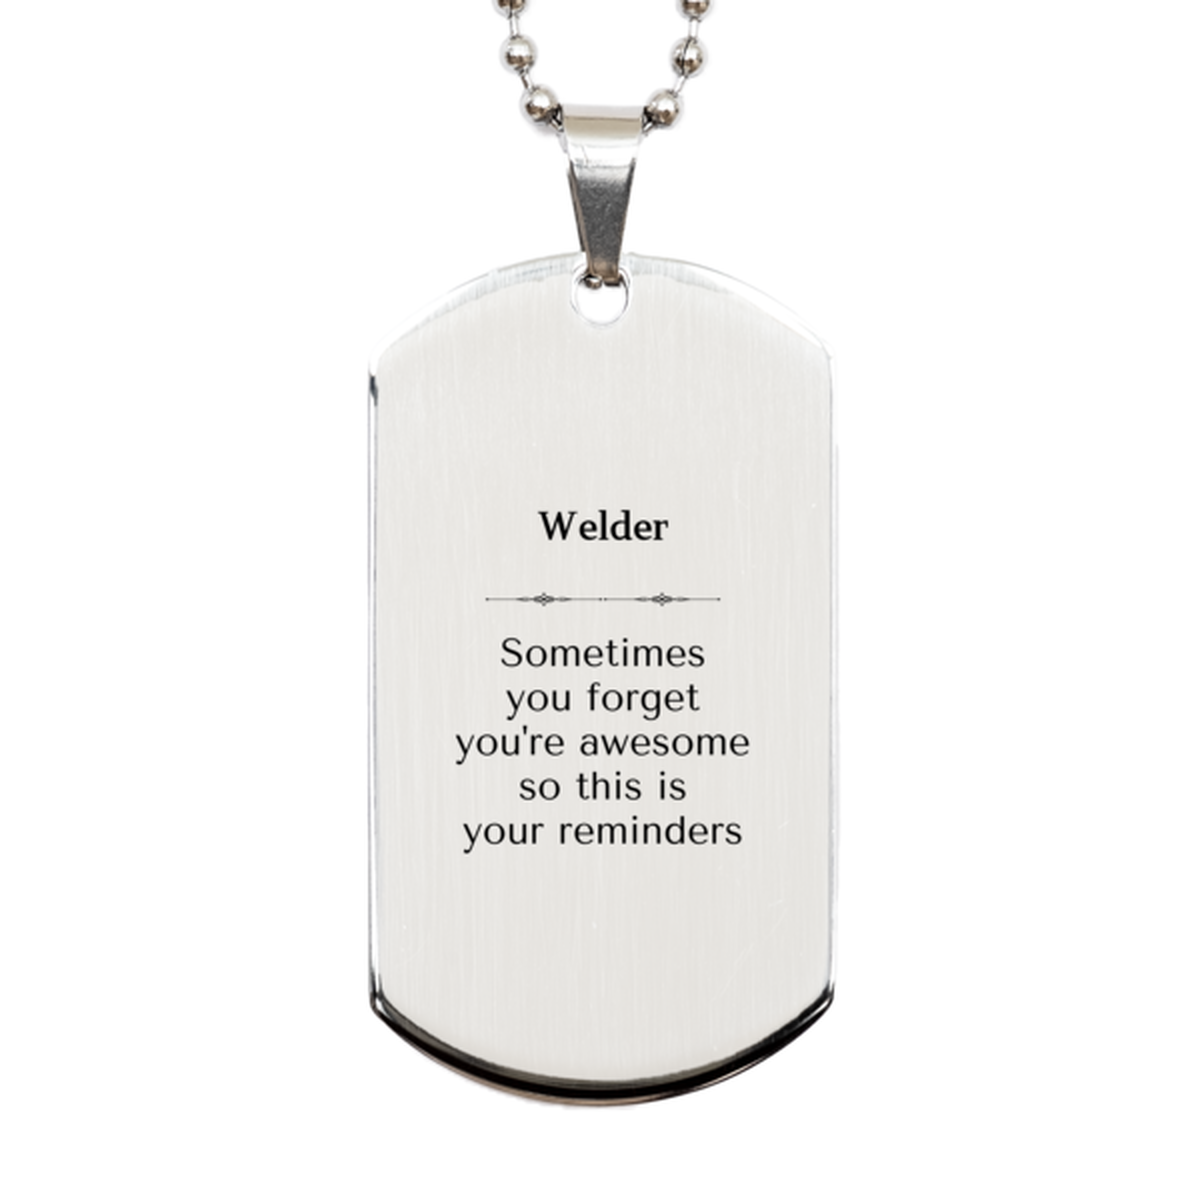 Sentimental Welder Silver Dog Tag, Welder Sometimes you forget you're awesome so this is your reminders, Graduation Christmas Birthday Gifts for Welder, Men, Women, Coworkers